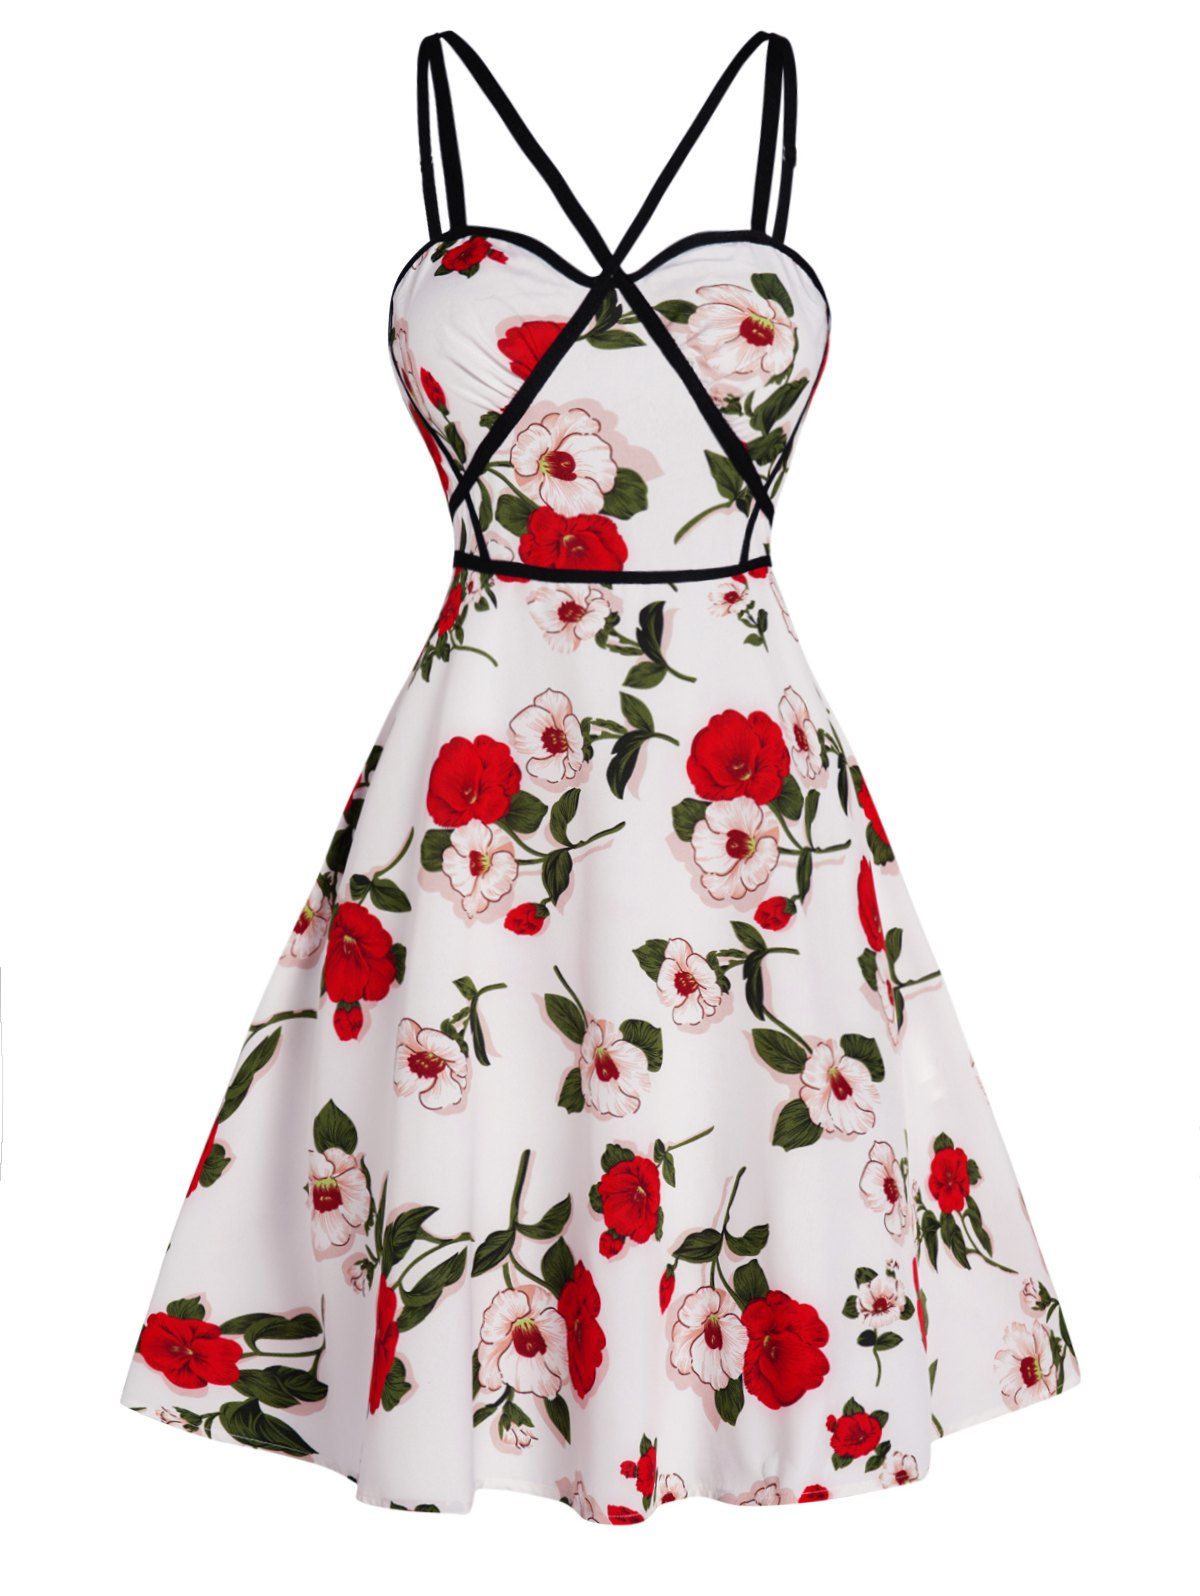 Flower Print Mini Sundress Contrast Piping Crossover Adjustable Strap A Line Dress - WHITE XL